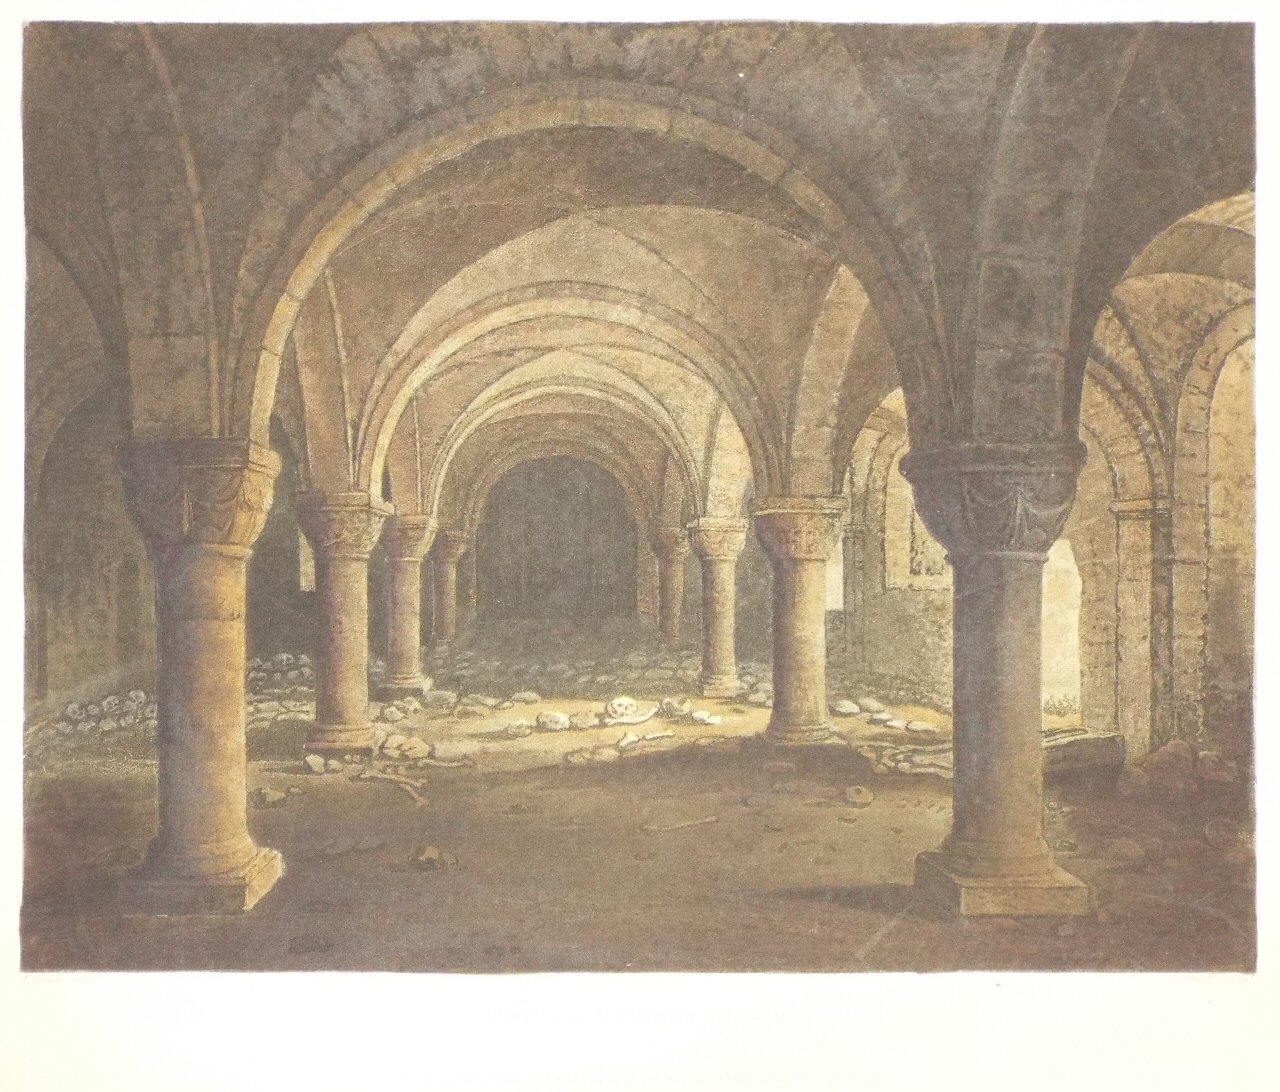 Aquatint - The Crypt of St. Peter's Church - Bluck